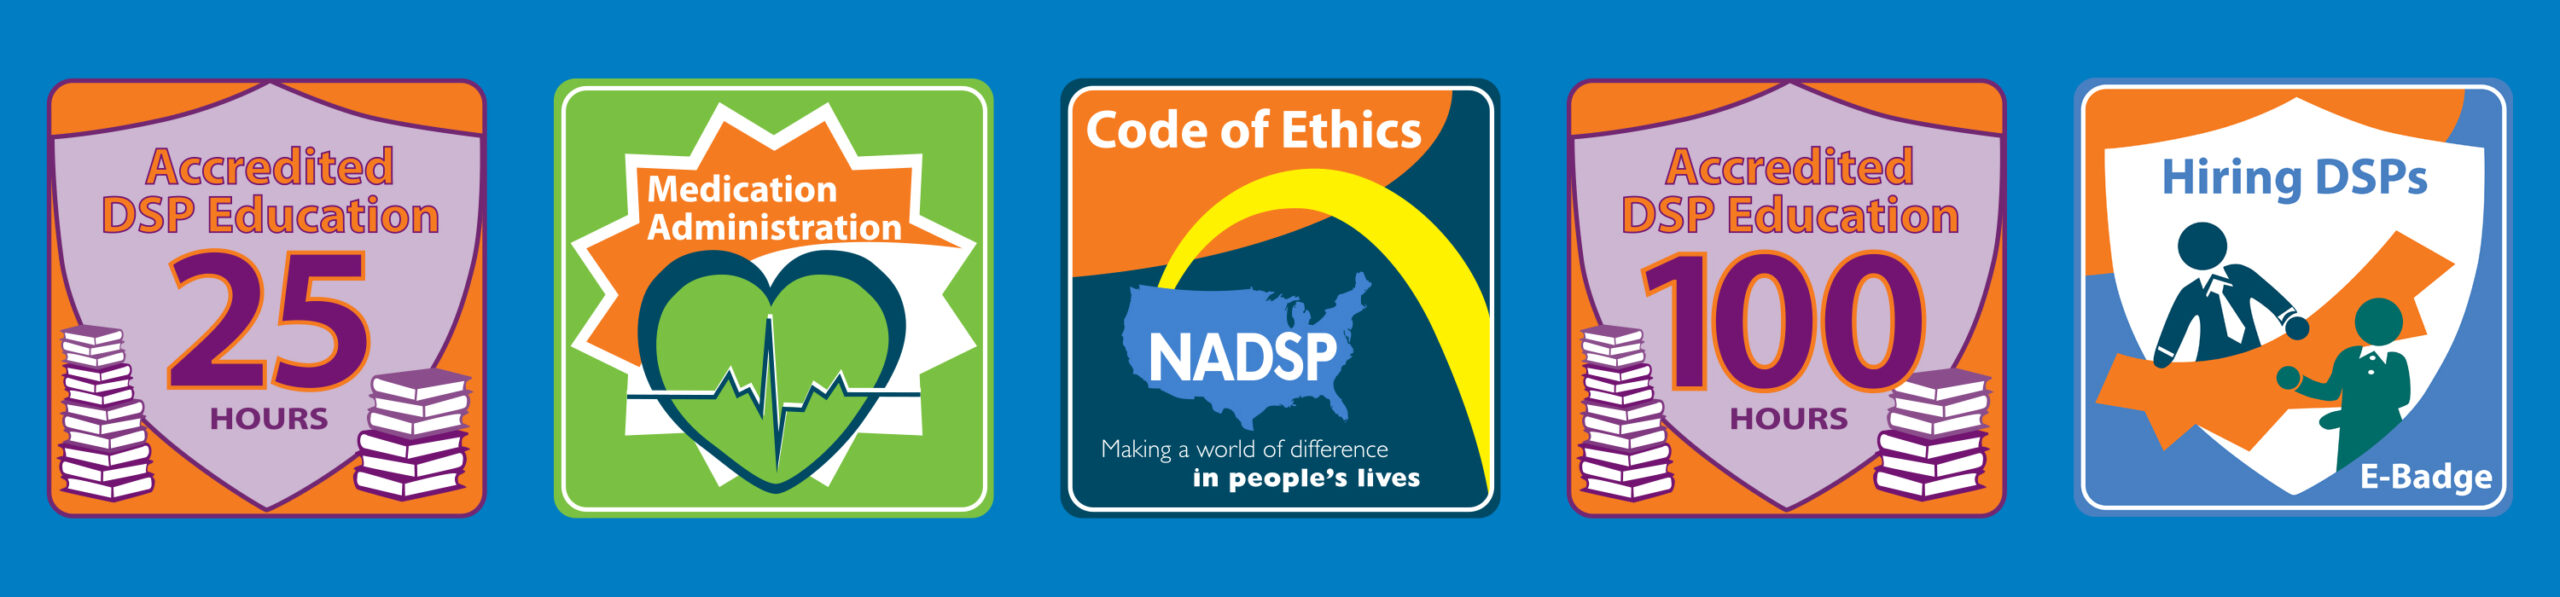 Five colorful pages for NADSP program. From left to right accredited DSP education 25 hours, medical administration, code of ethics, accredited DSP education 100 hours, hiring DSPs.